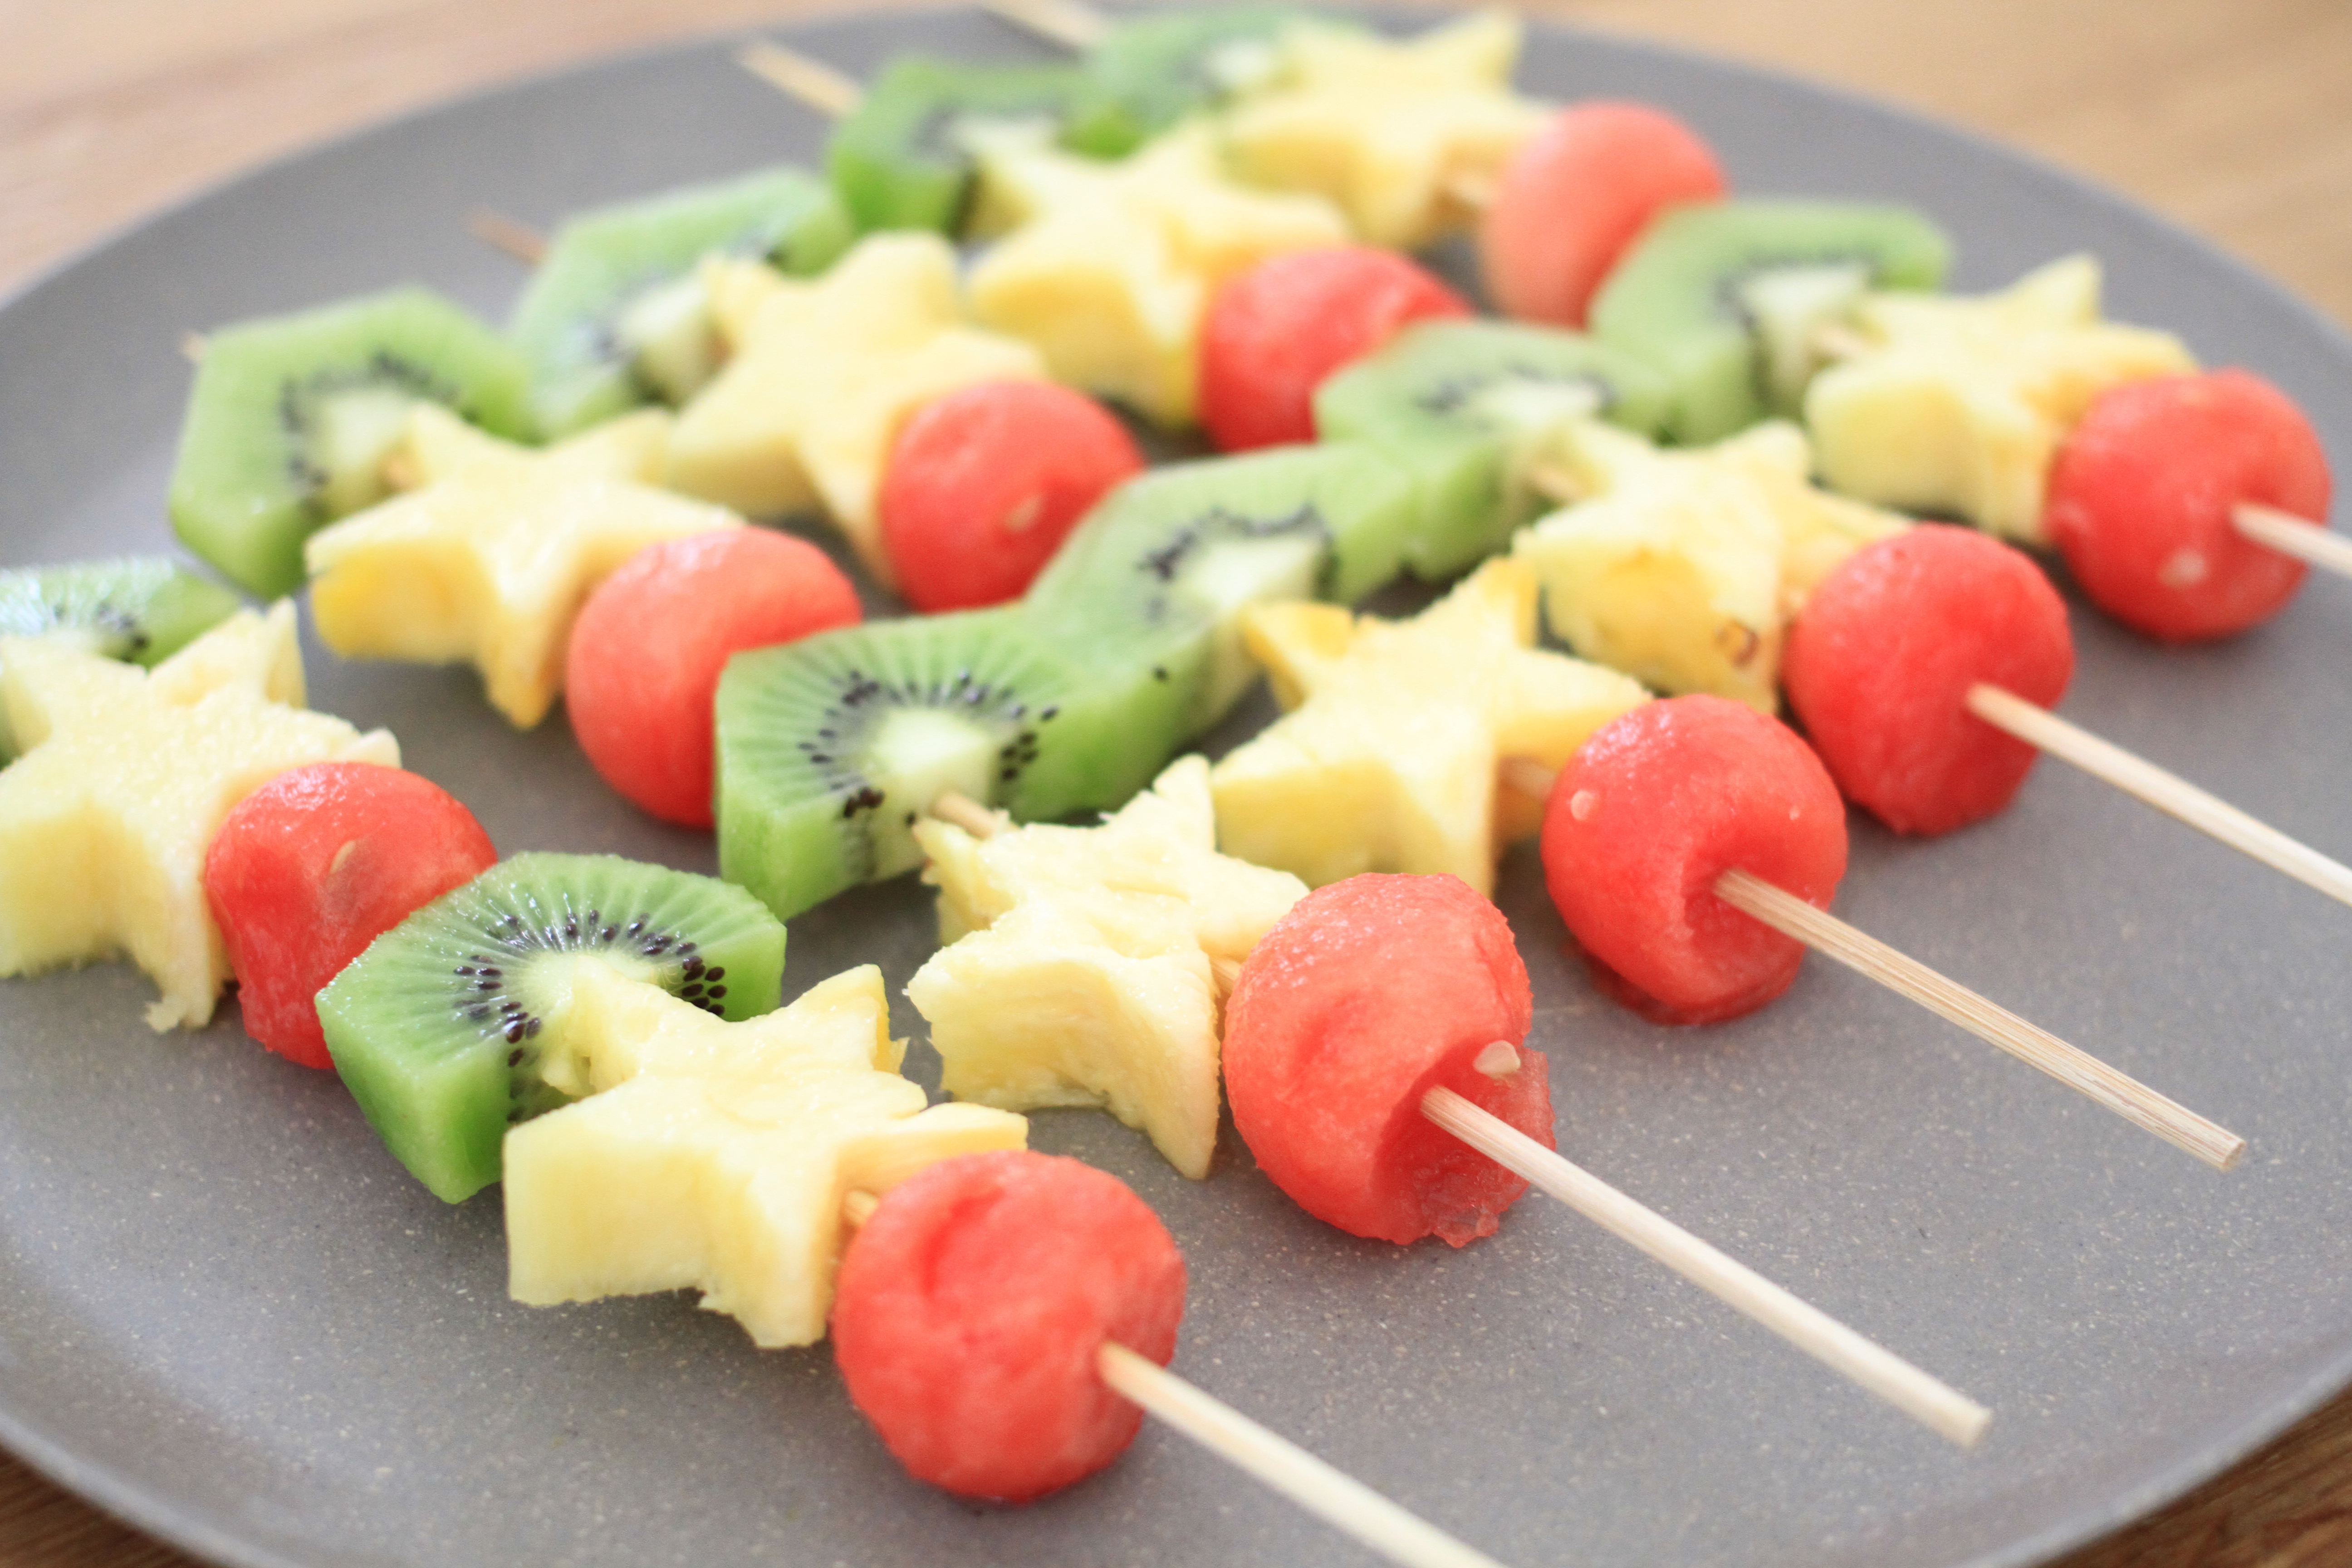 http://kerrynboogaard.com/category/tips-for-back-to-school-healthy-snacks/